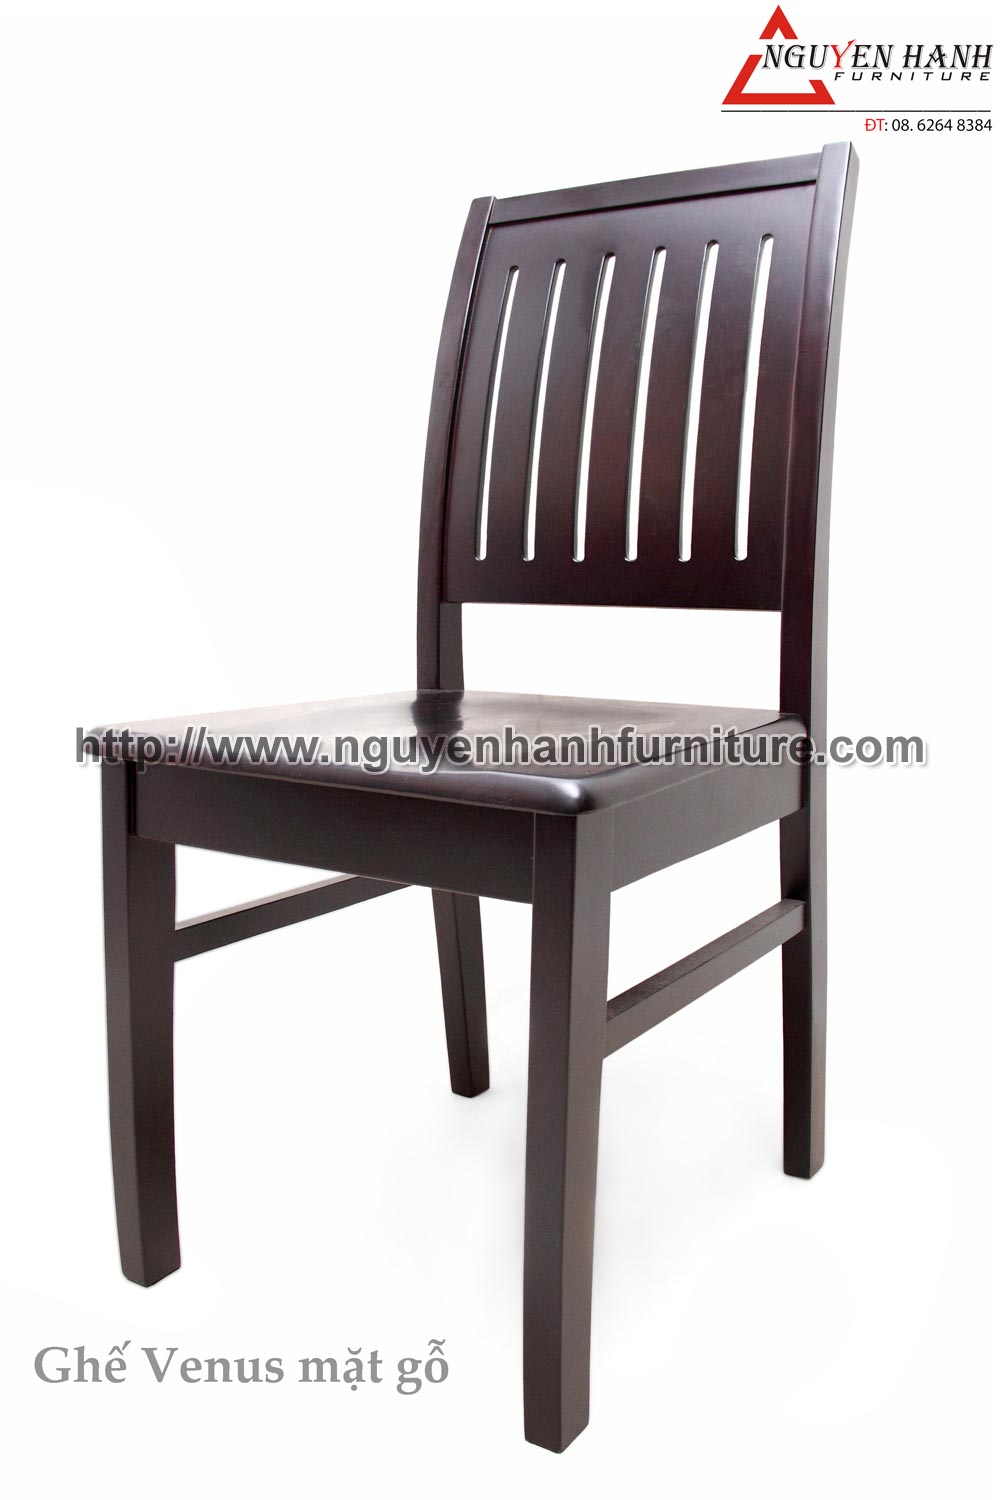 Name product: Venus chair with wooden surface